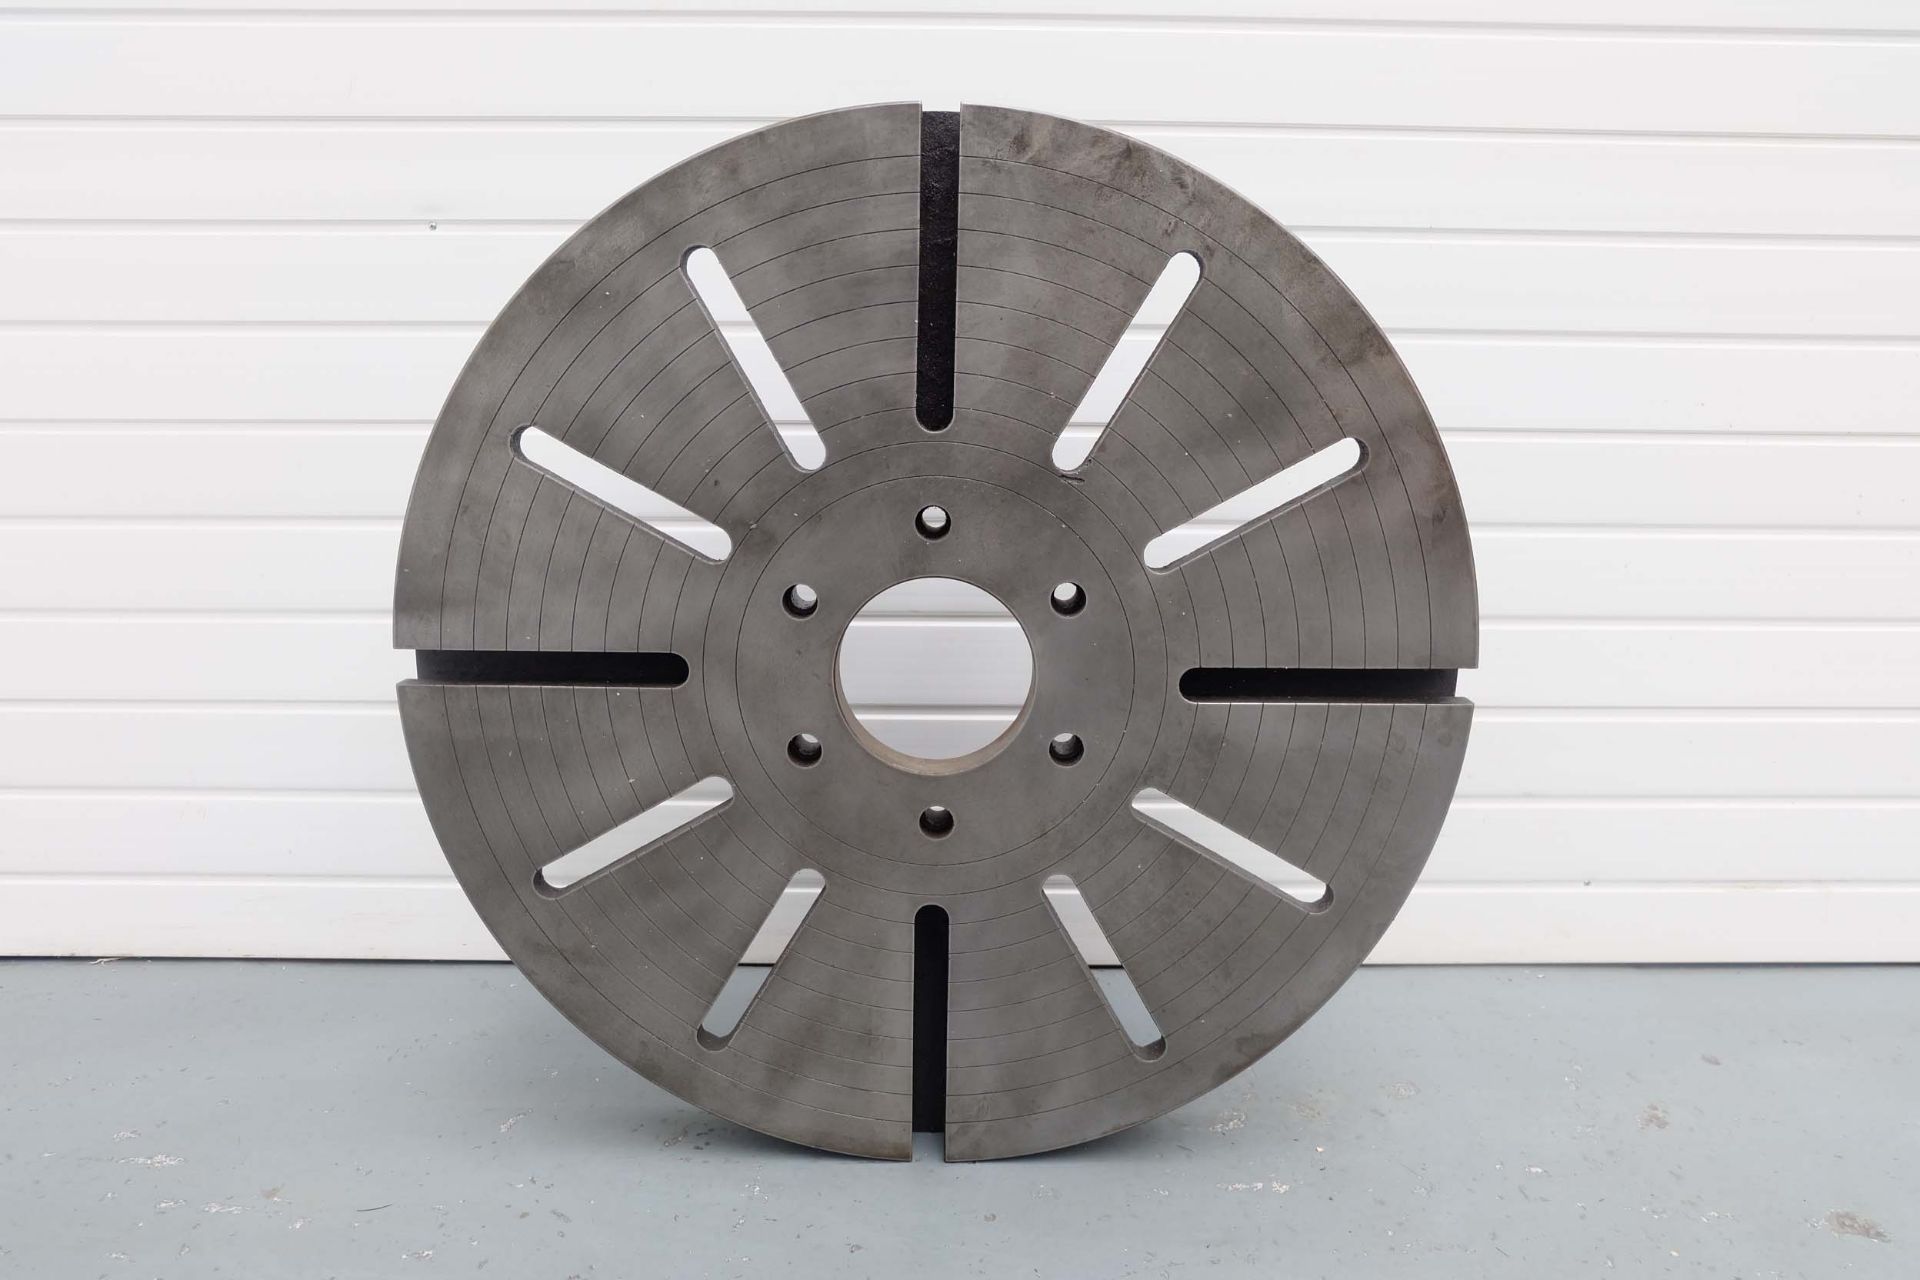 33" Diameter Face Plate. Thickness 3". Hole Through Middle 6". PCD of Bolt Holes 9 1/4".